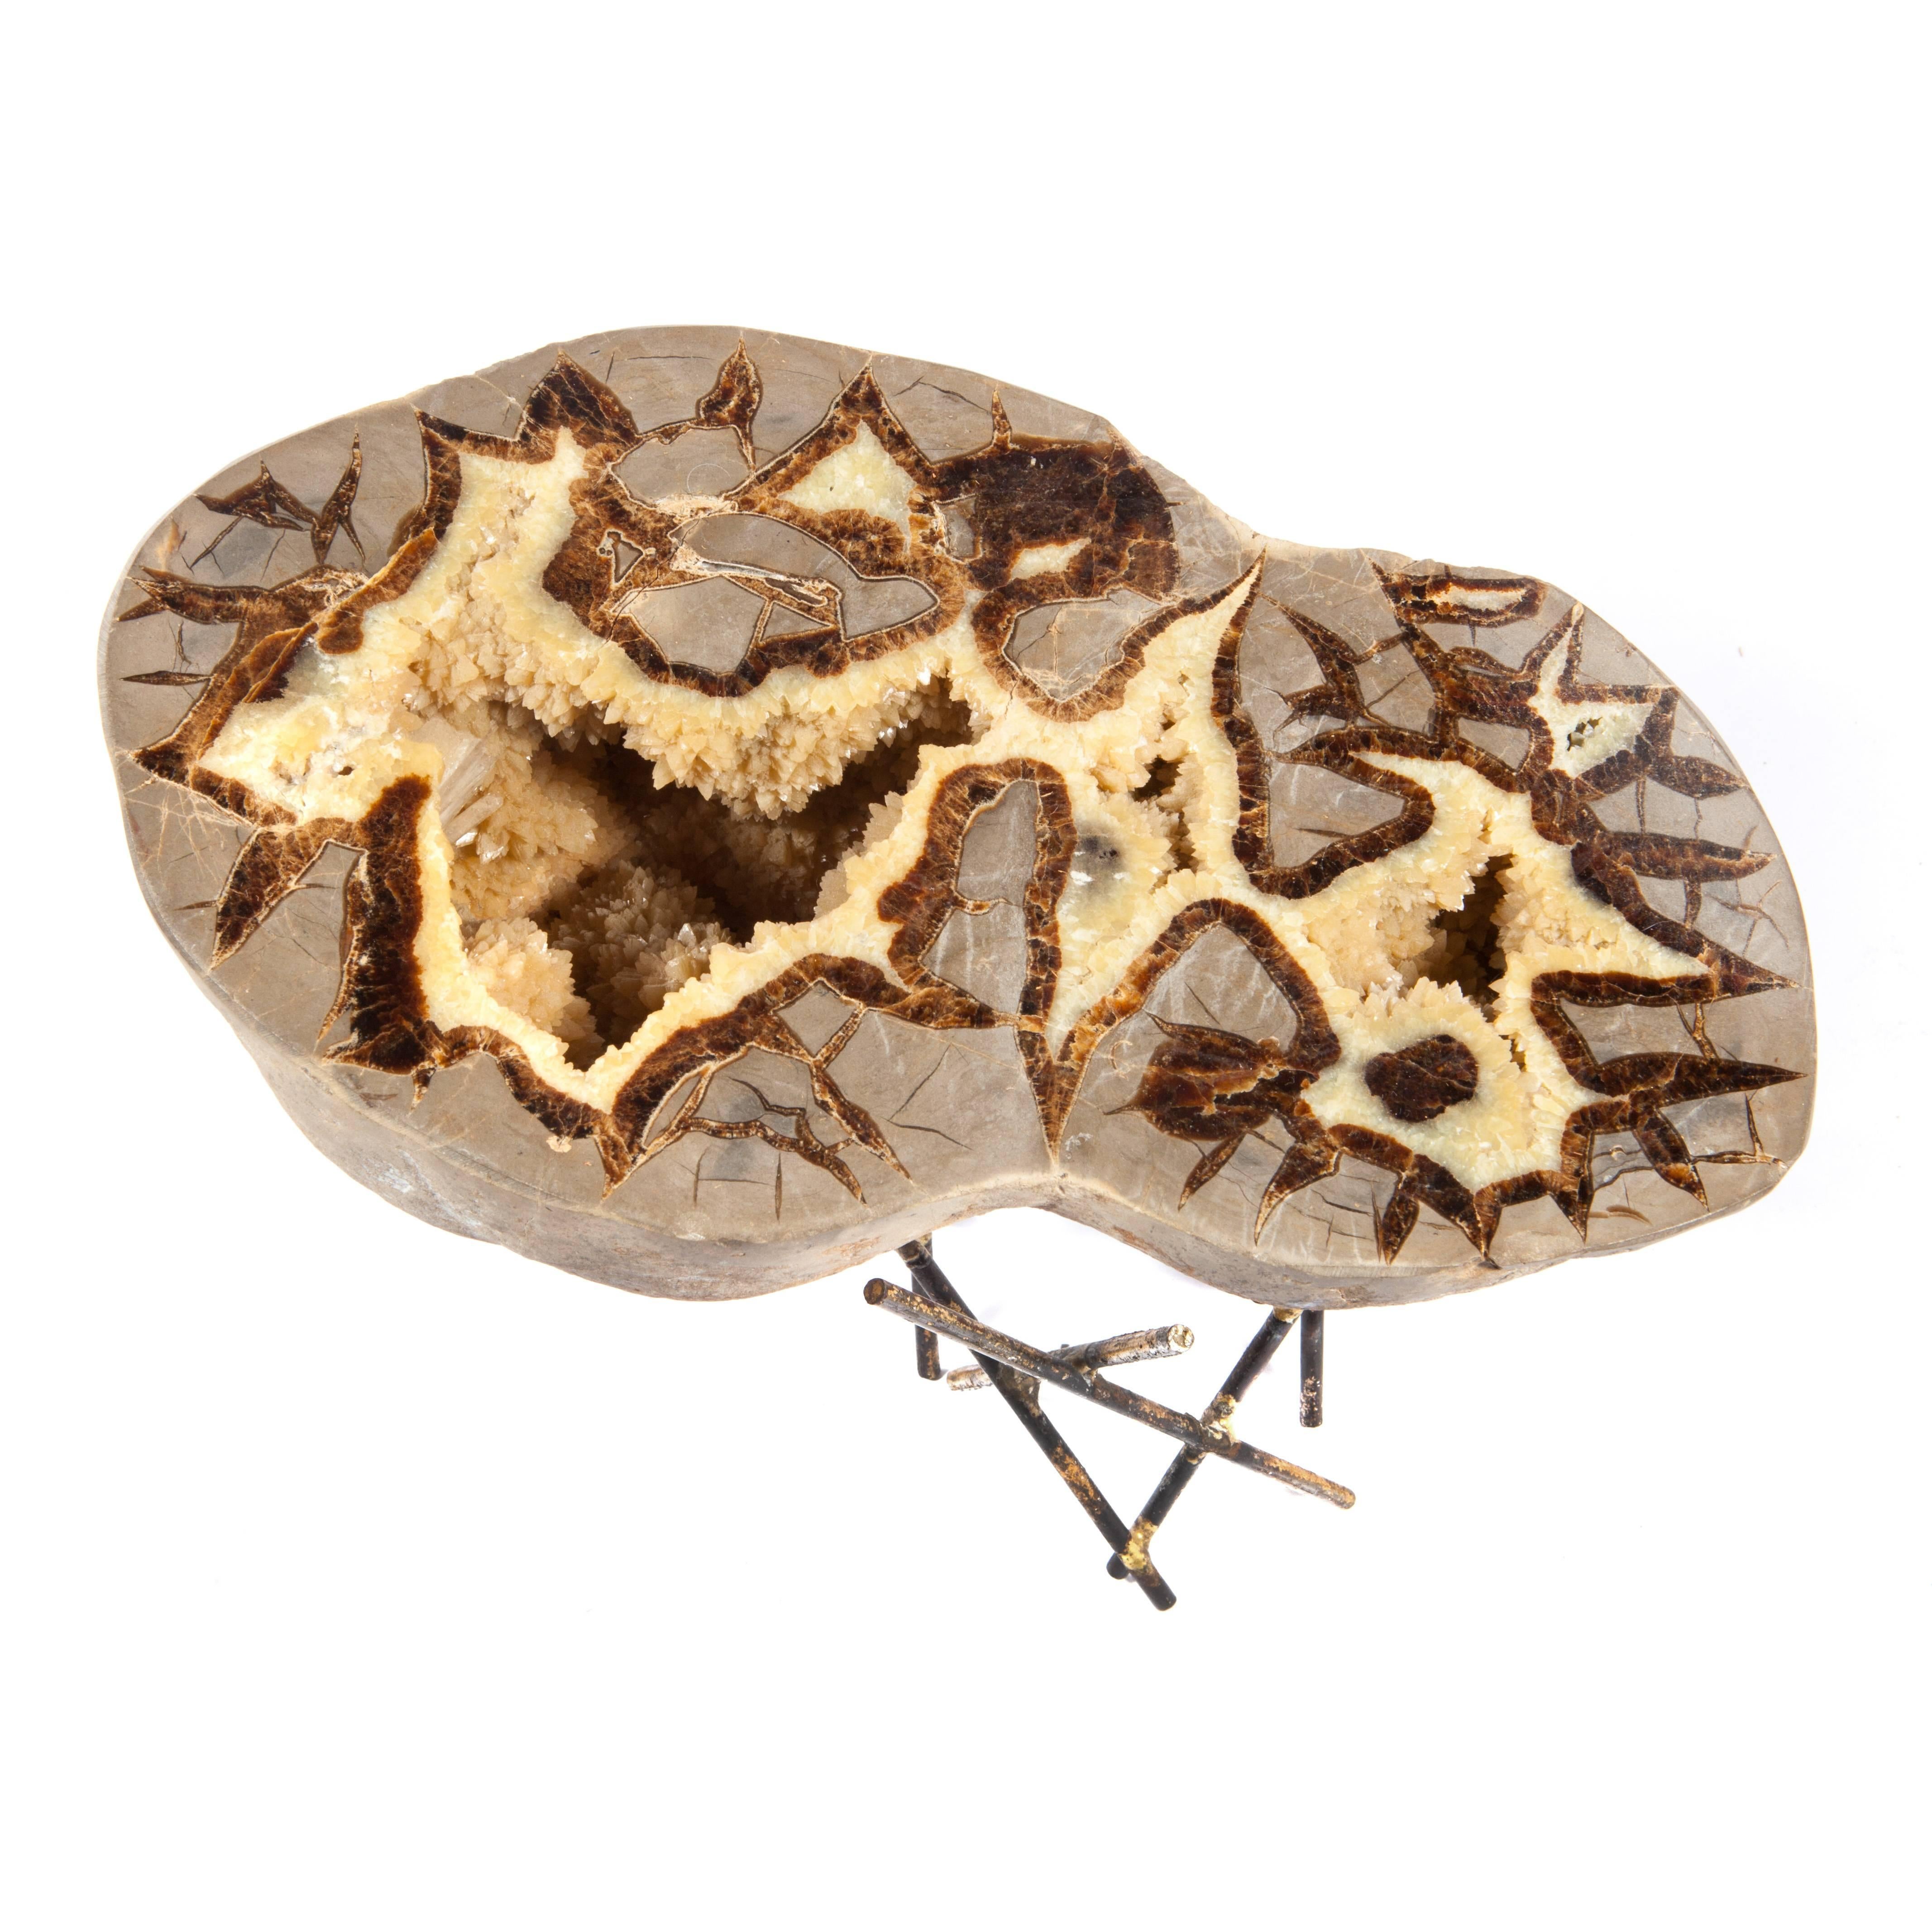 Geode on 1970s Sculptural Metal Stand In Good Condition For Sale In Brooklyn, NY